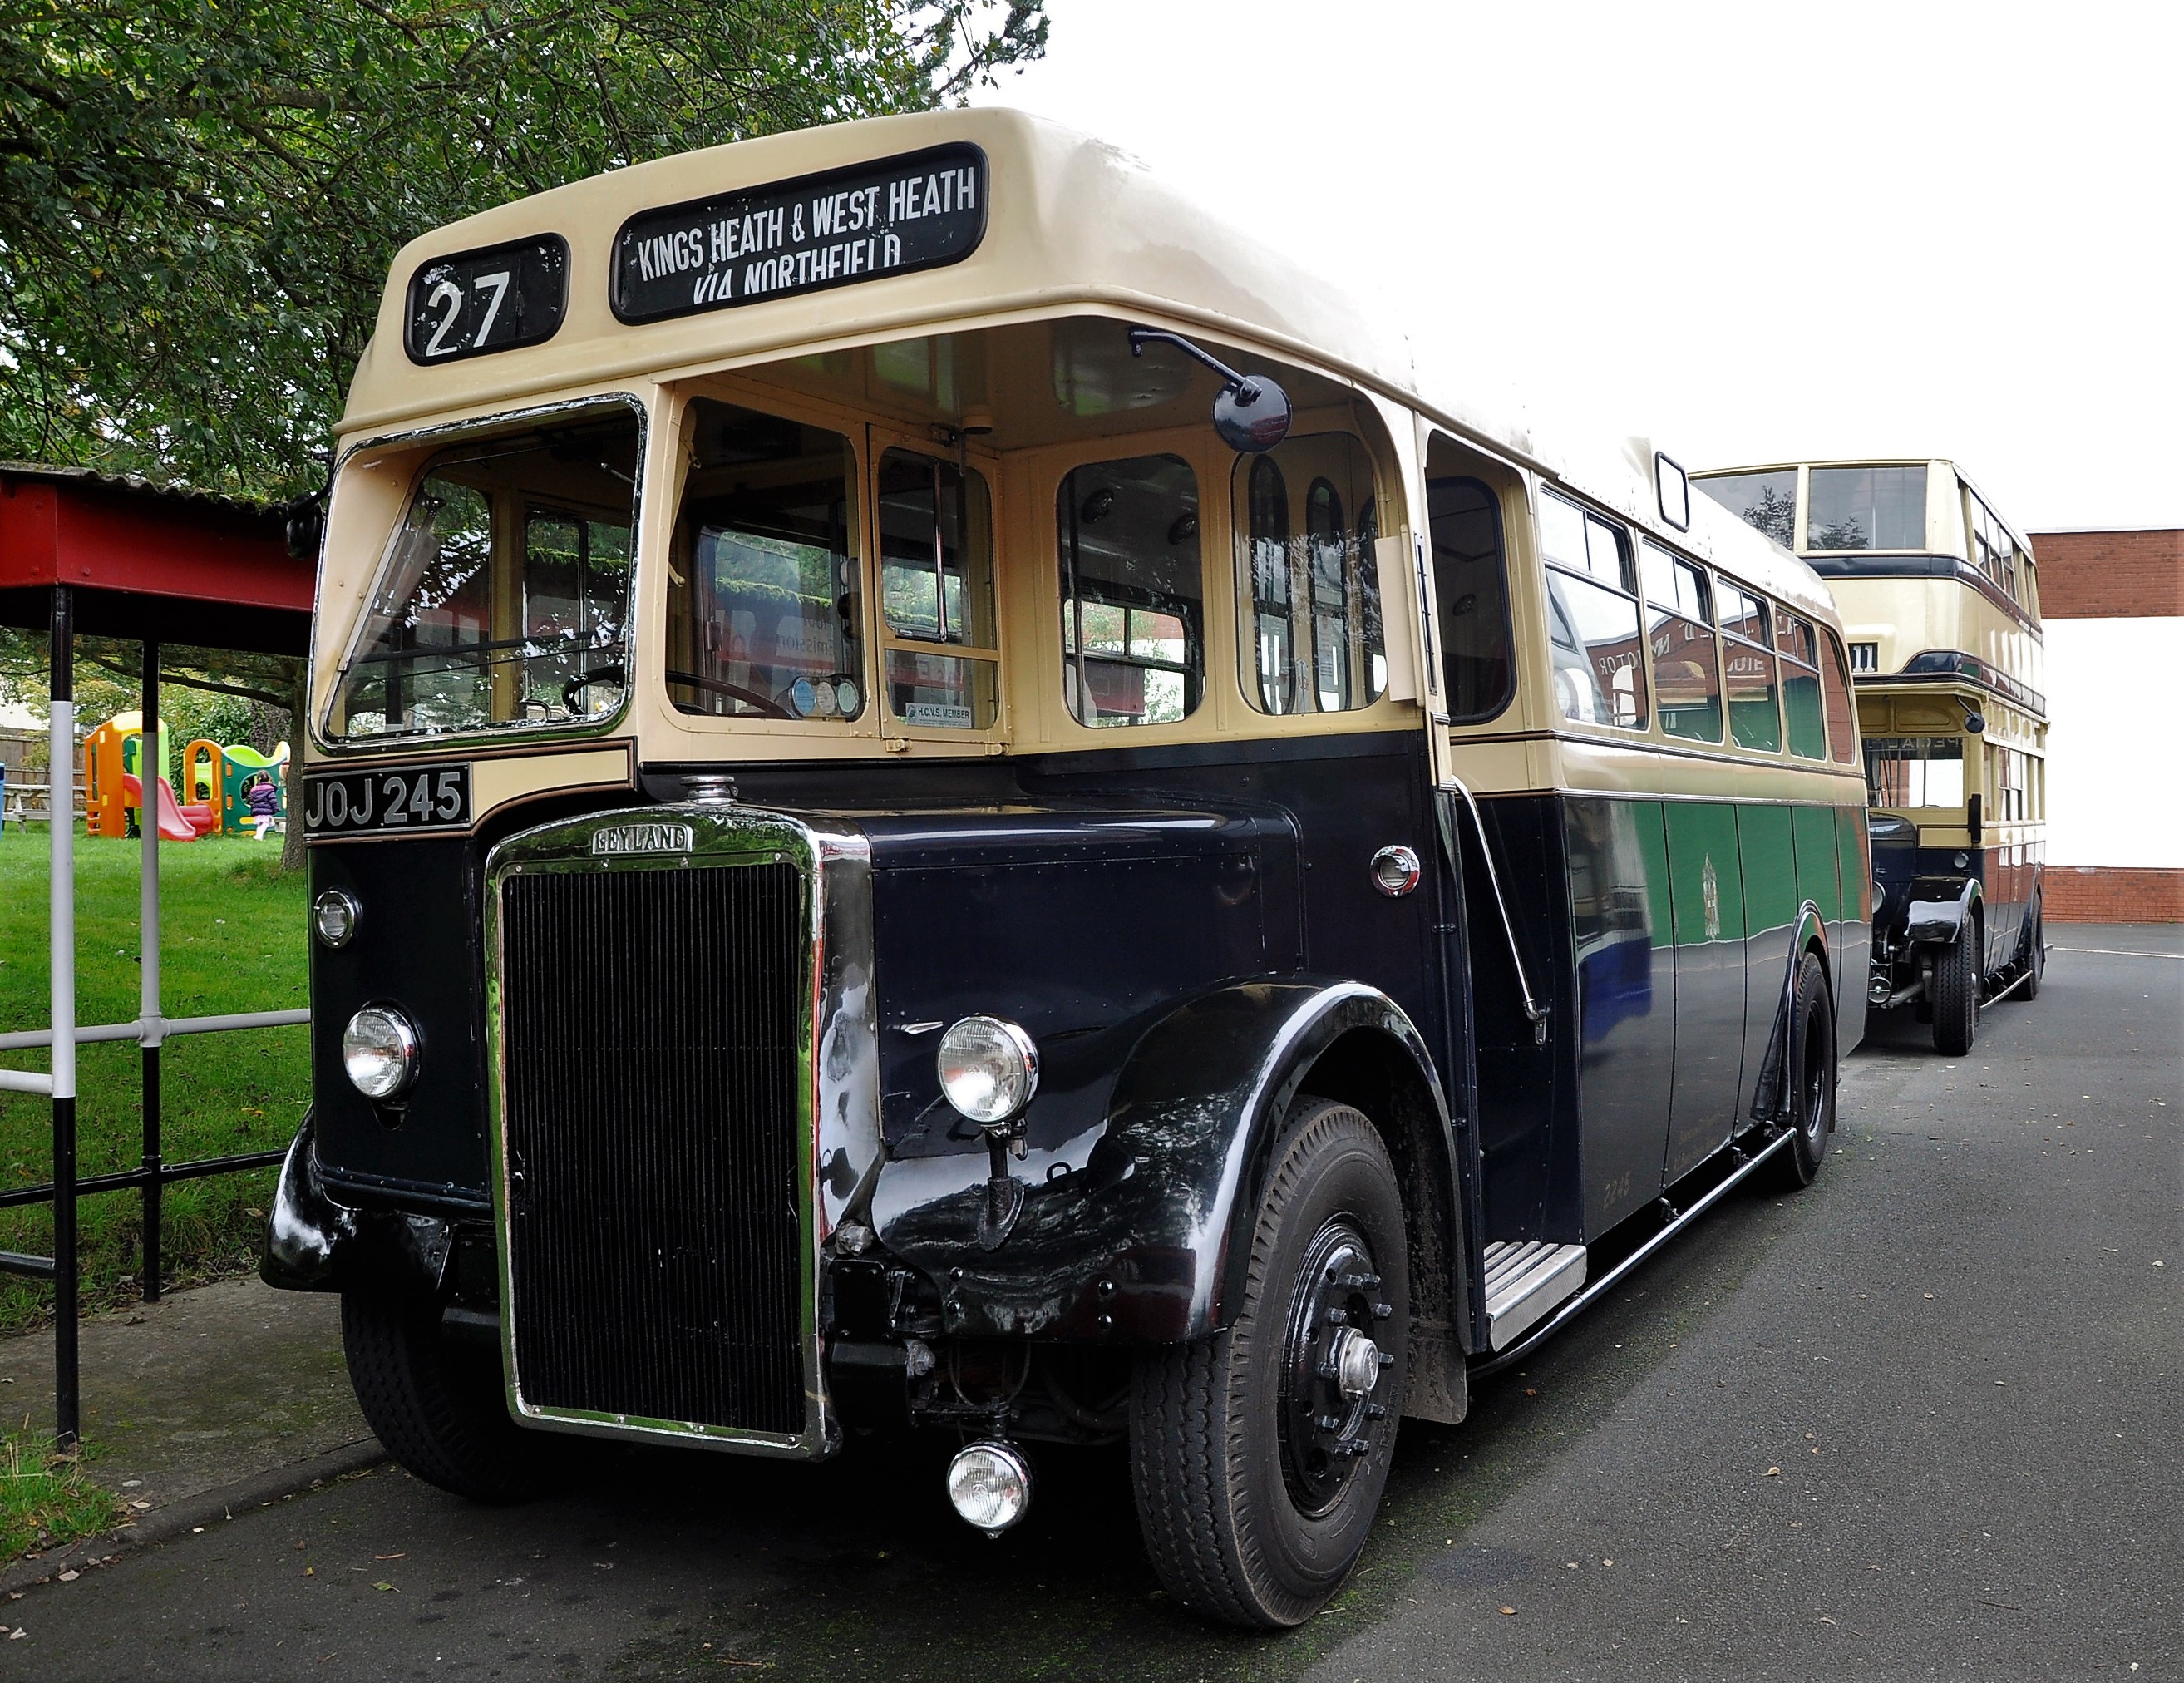 Transport Museum Wythall making a return